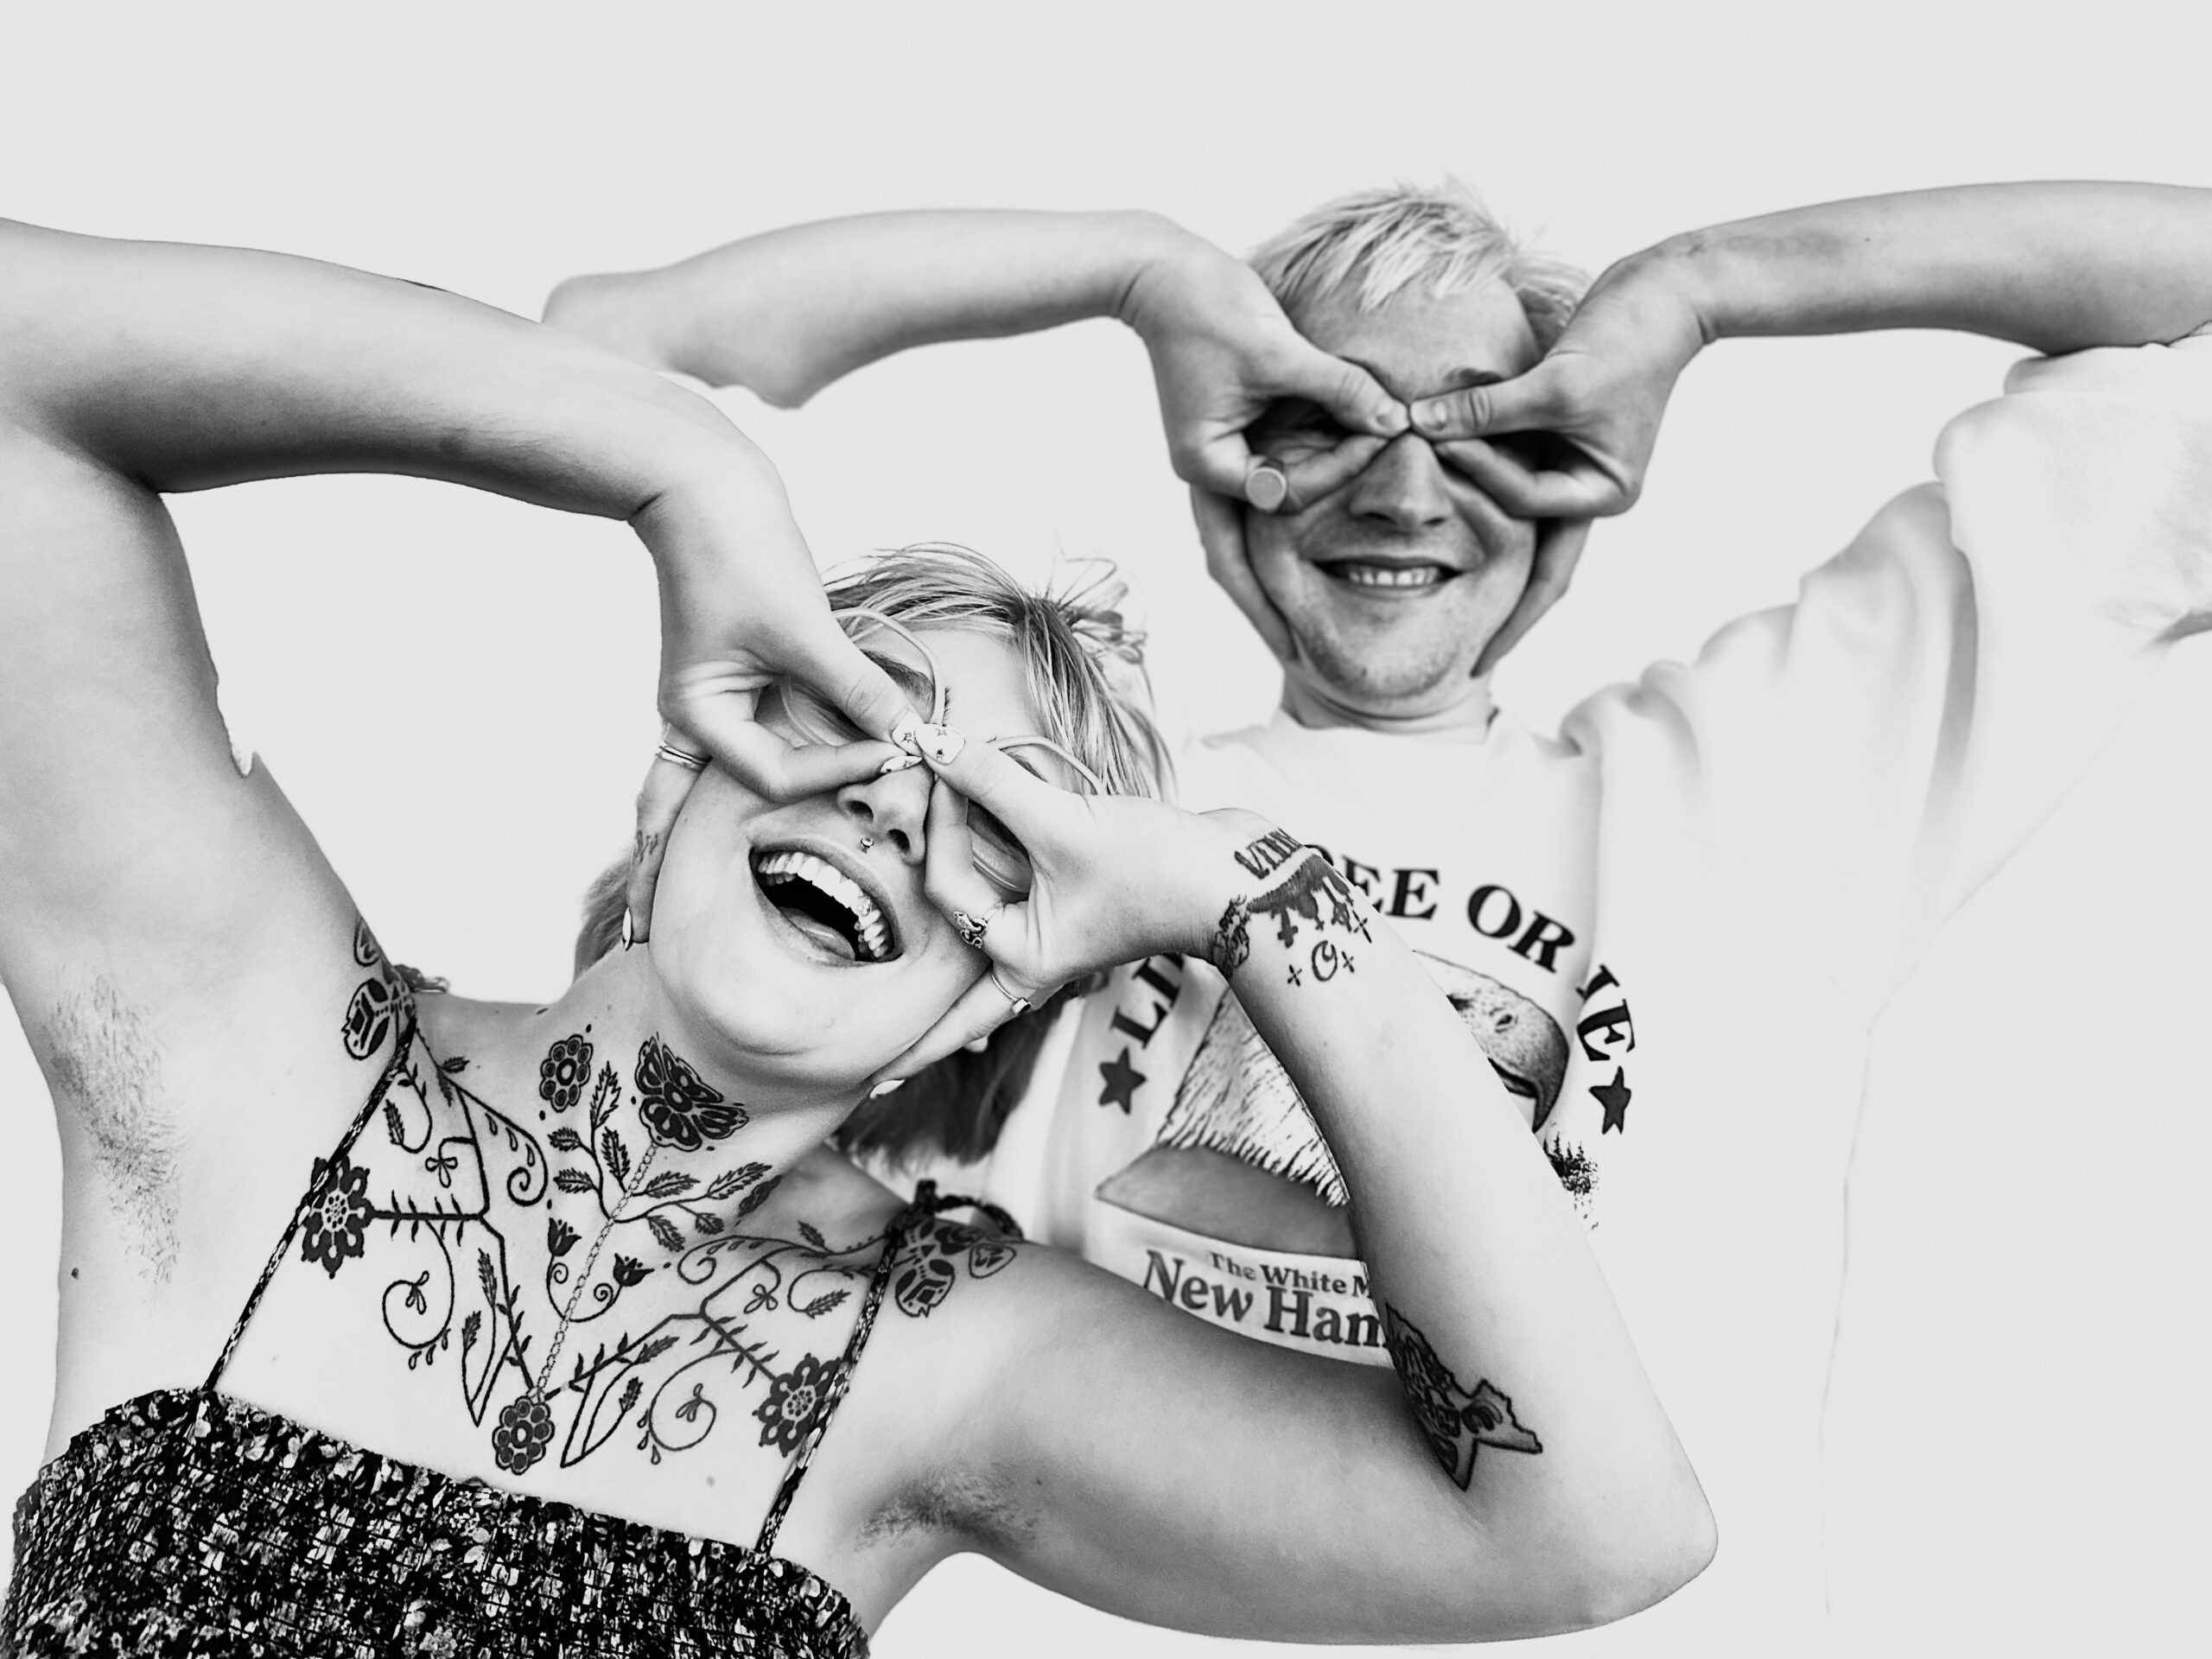 A black and white photo of two people making faces with their hands.